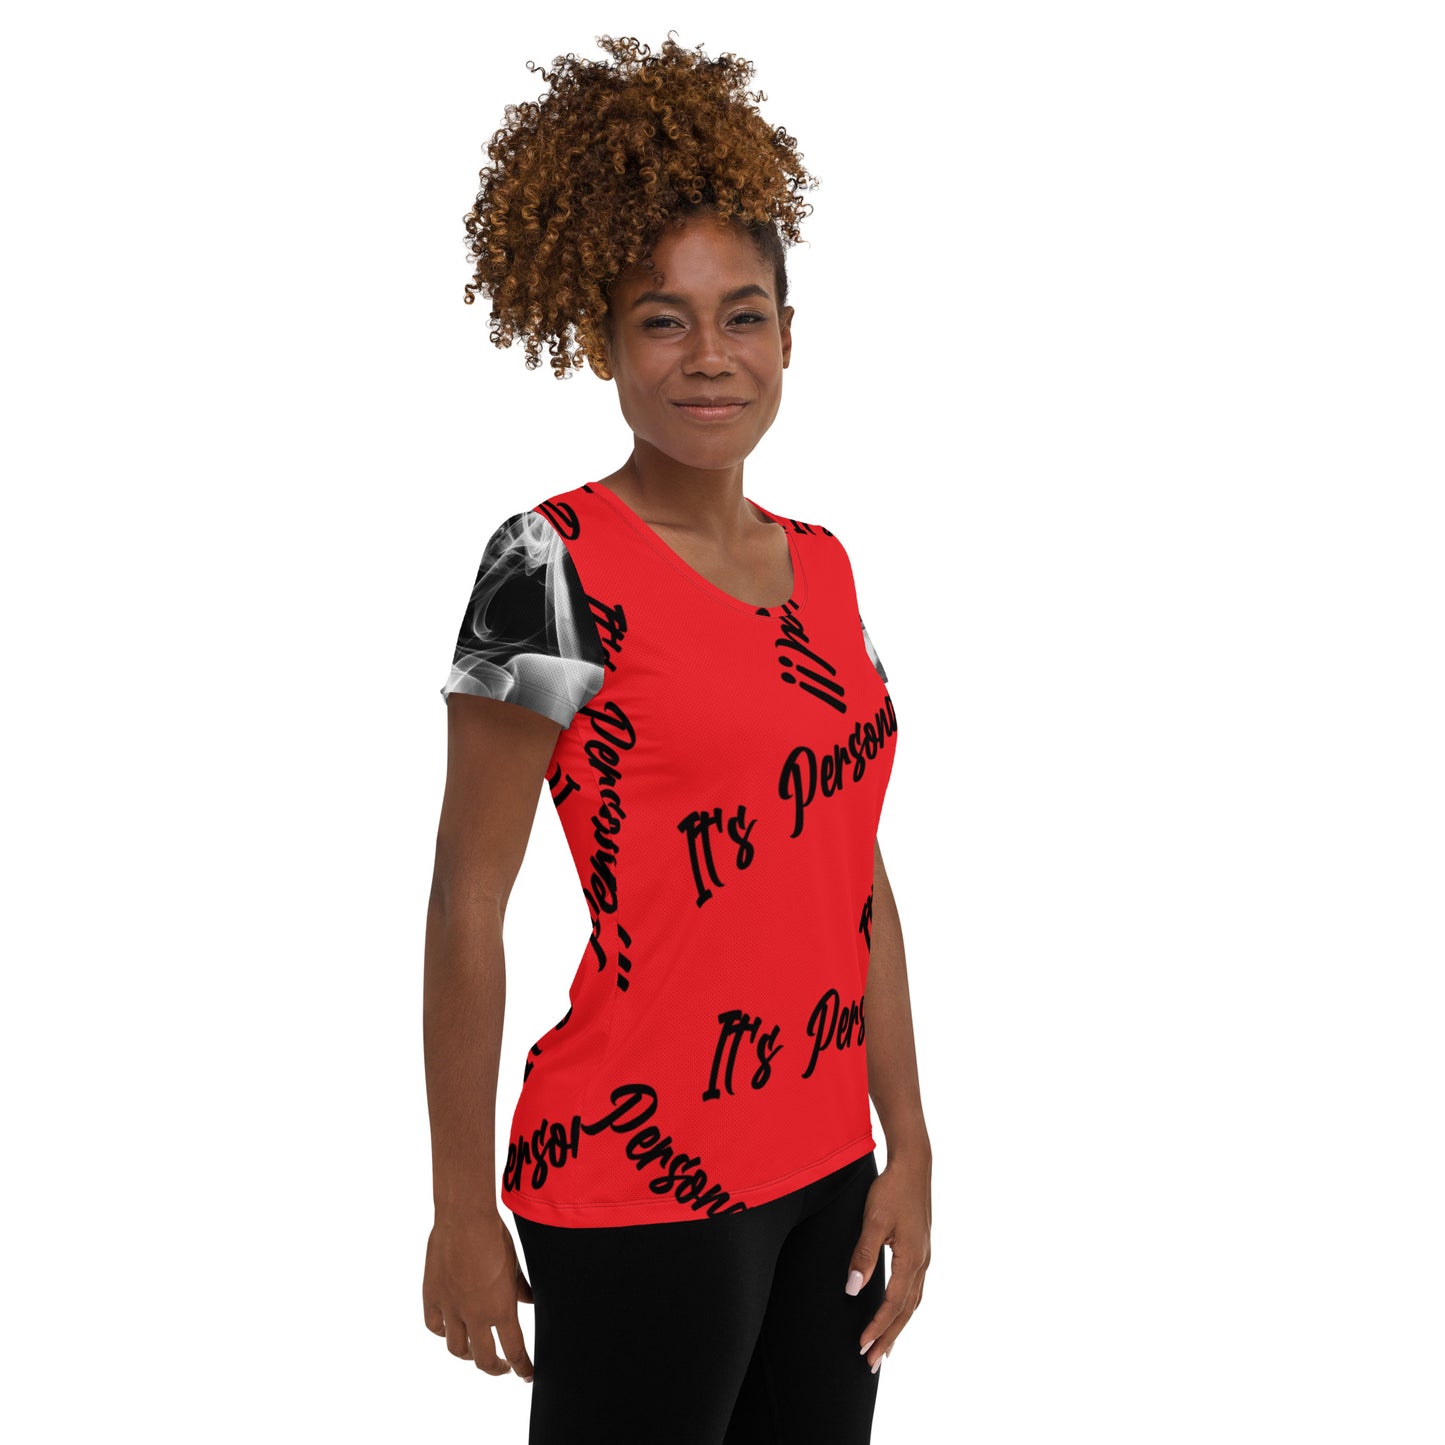 It's Personal  Red/Black Smoke Sleeves [All-Over Print Women's Athletic T-shirt]